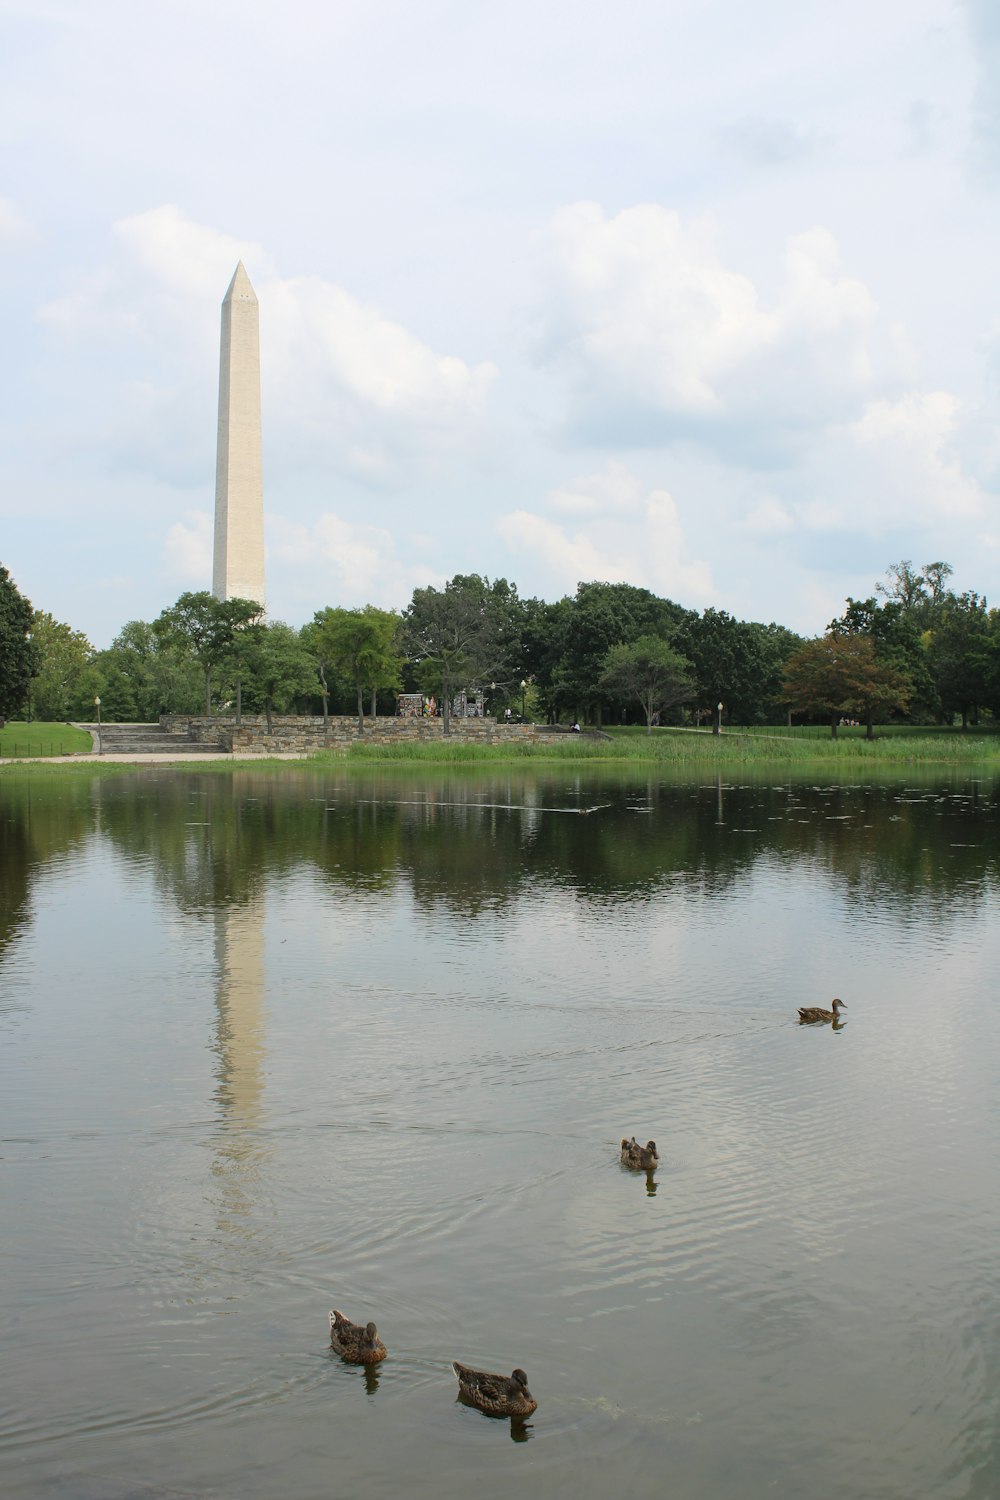 ducks swimming in a pond in front of the washington monument